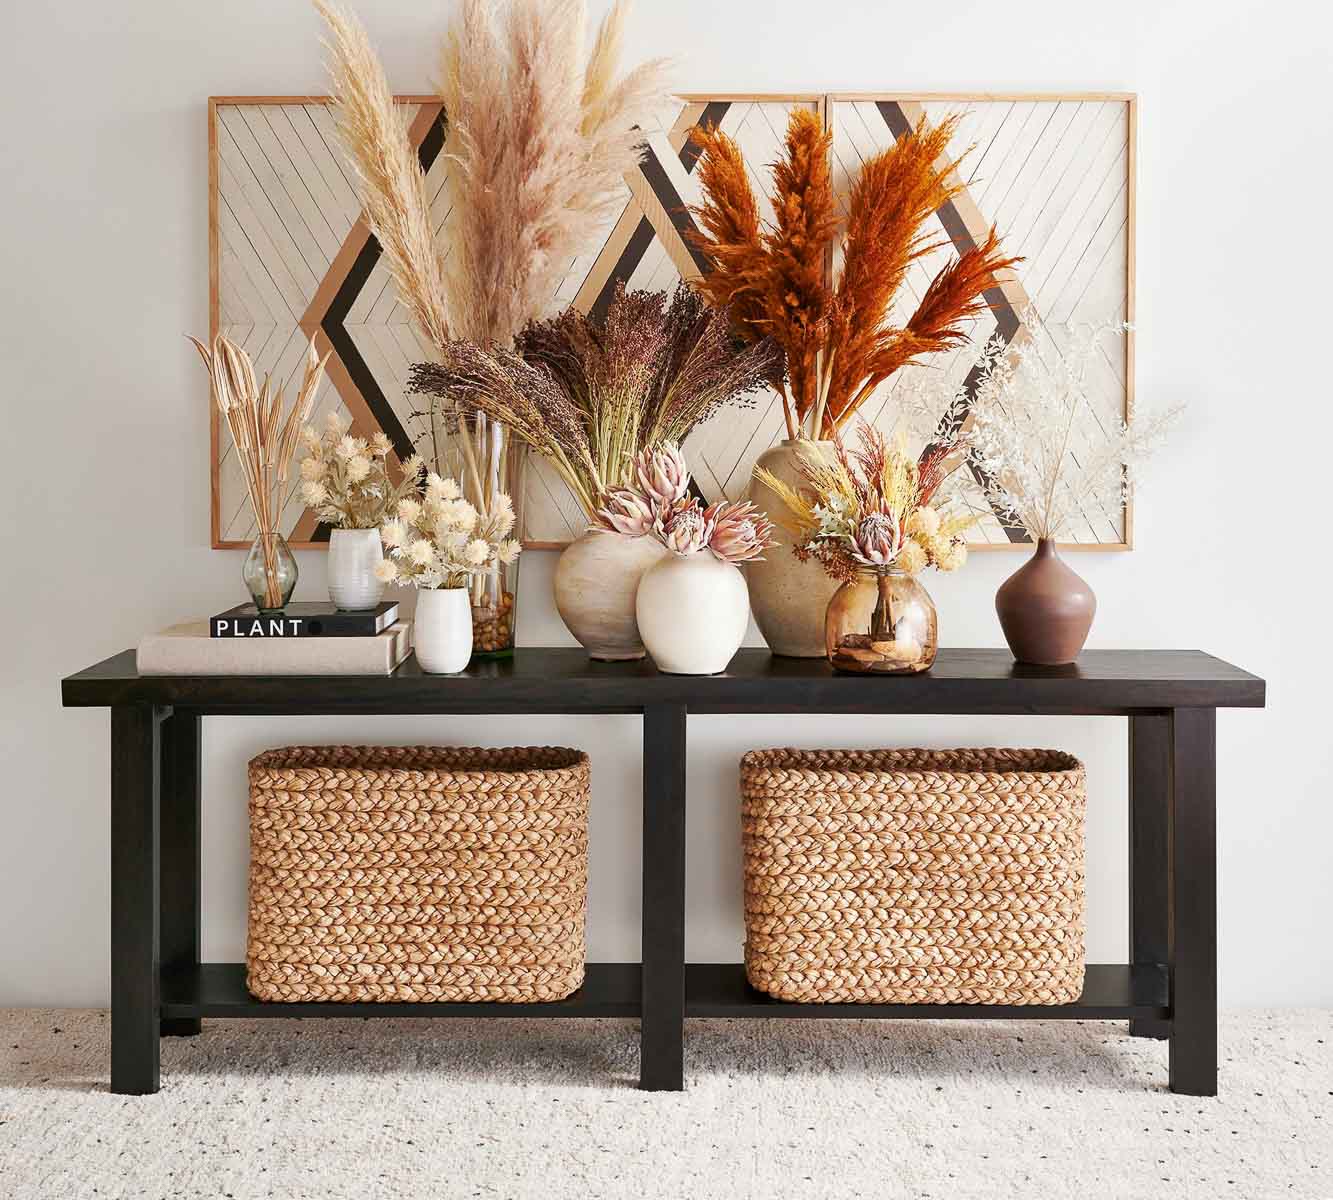 Narrow baskets under a console table